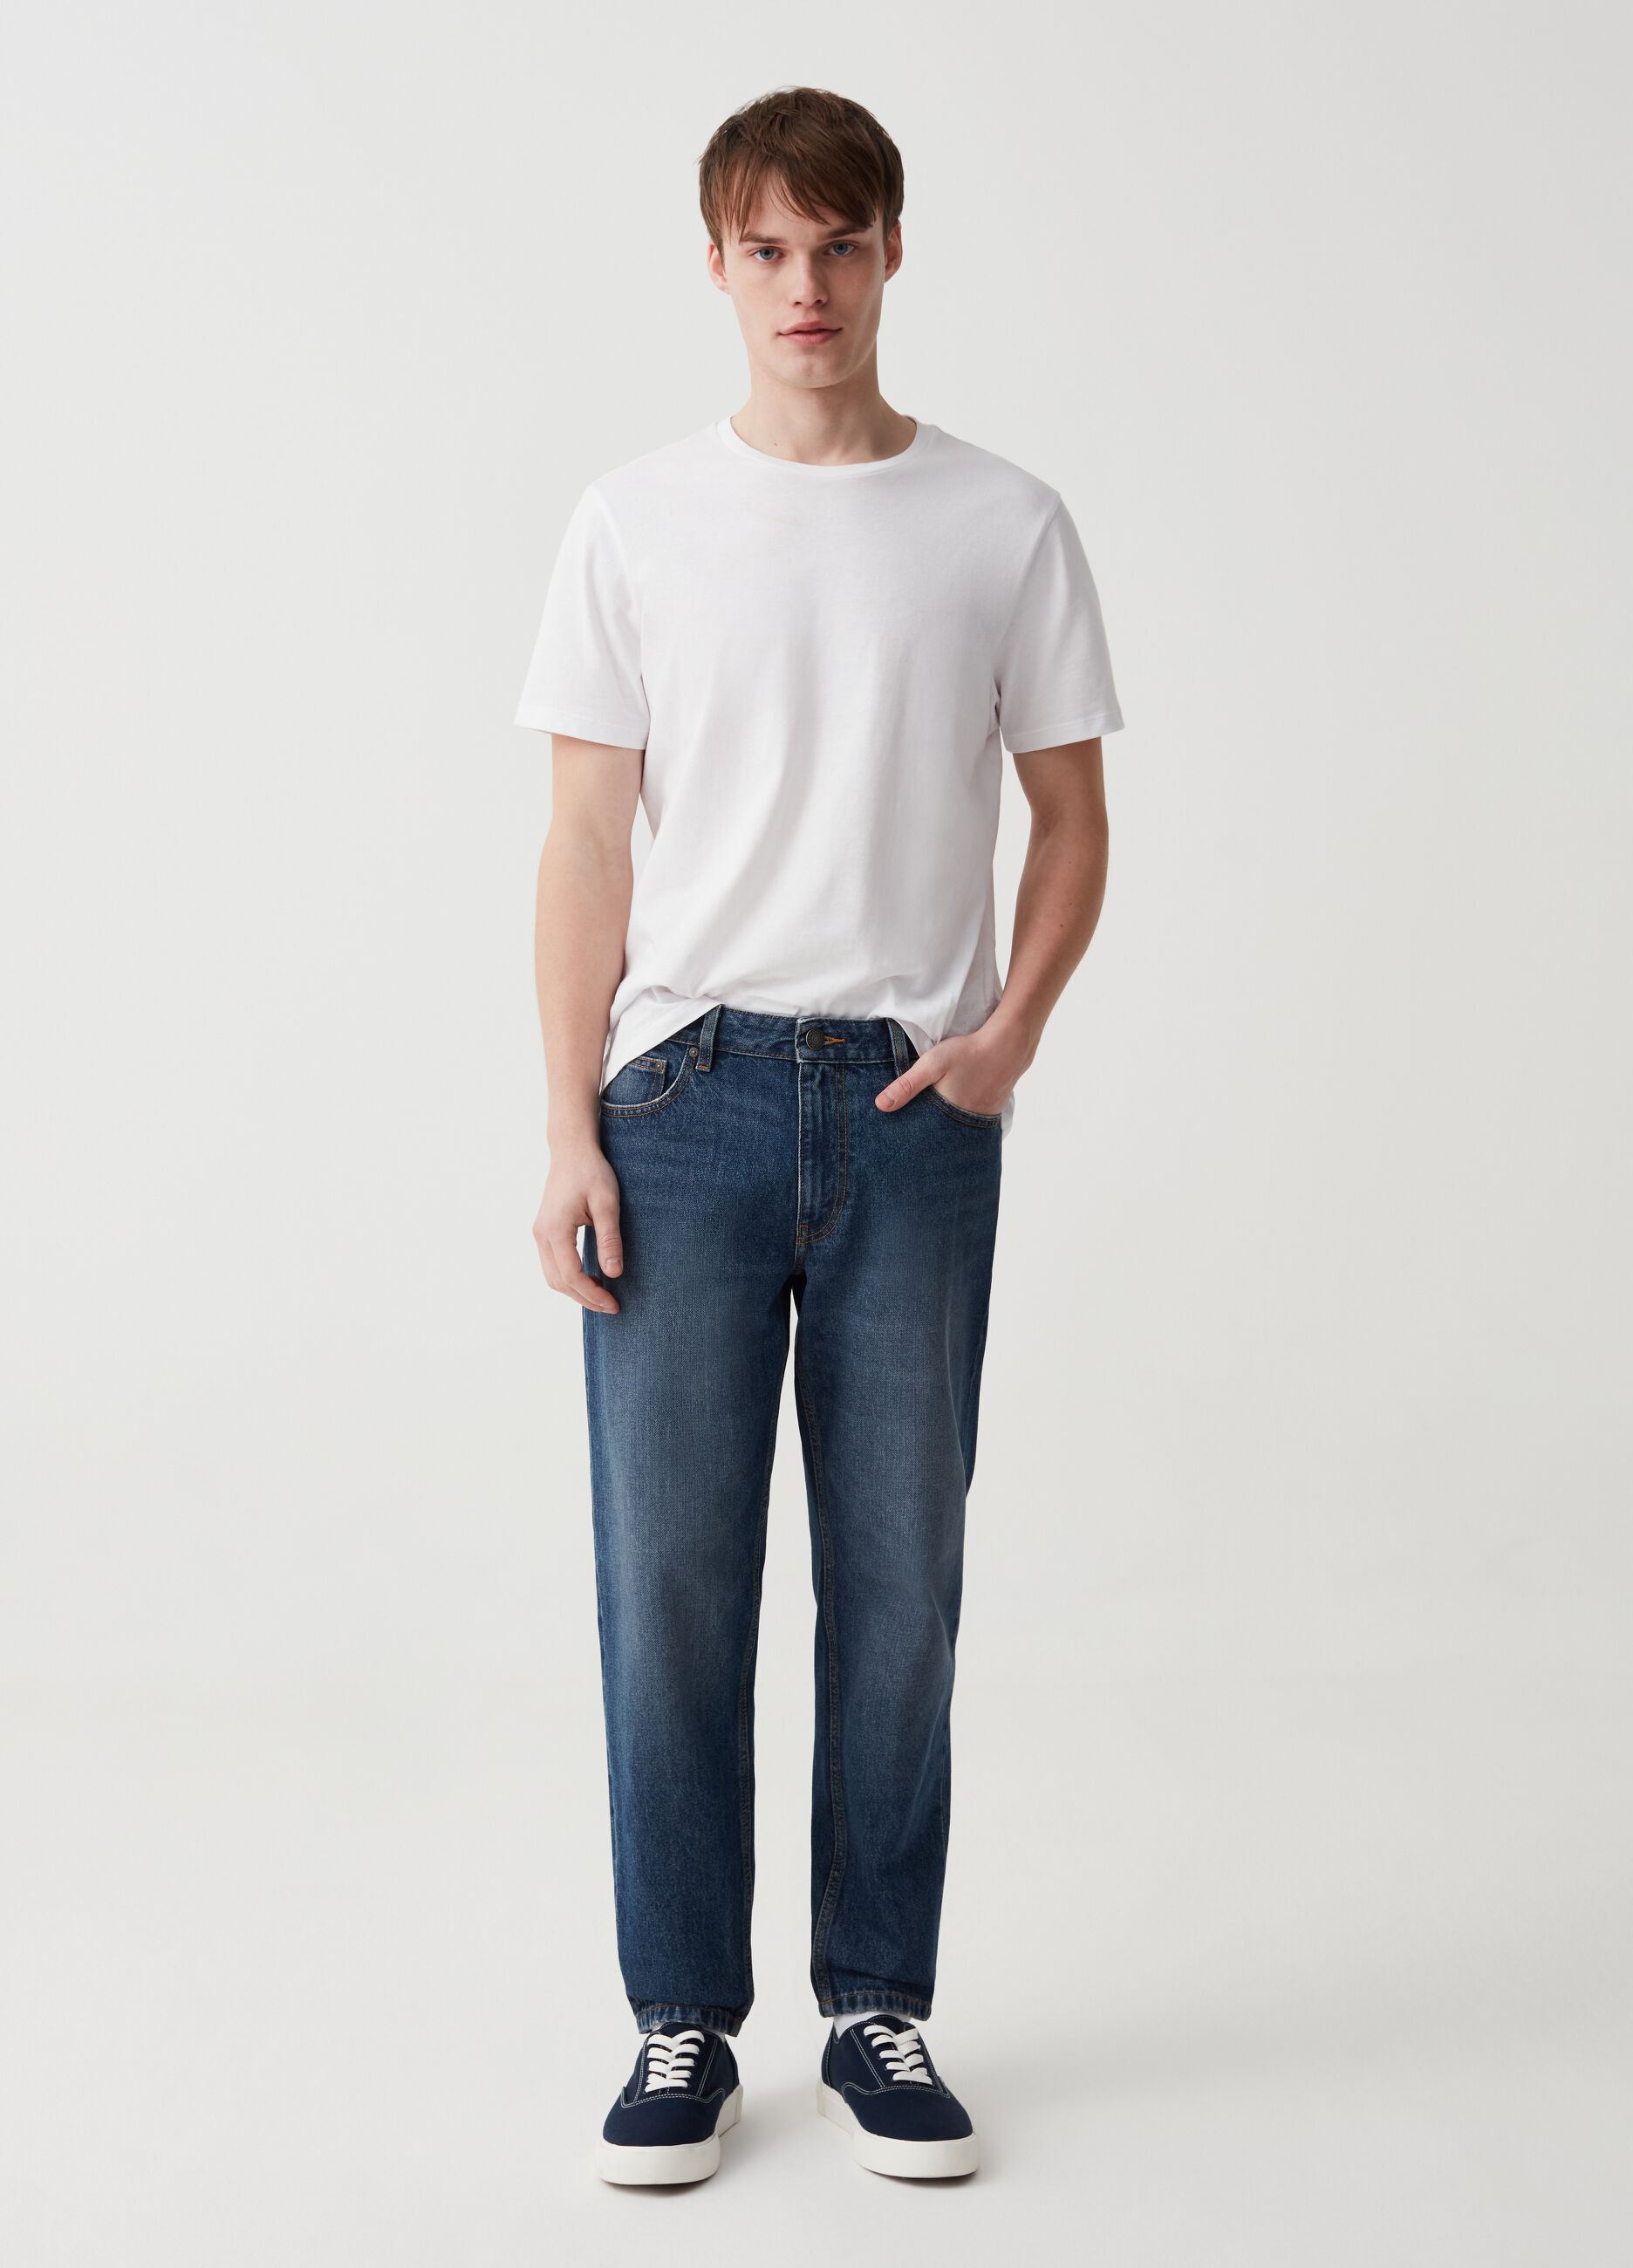 Buy Blue Jeans for Men by Buda Jeans Co Online | Ajio.com